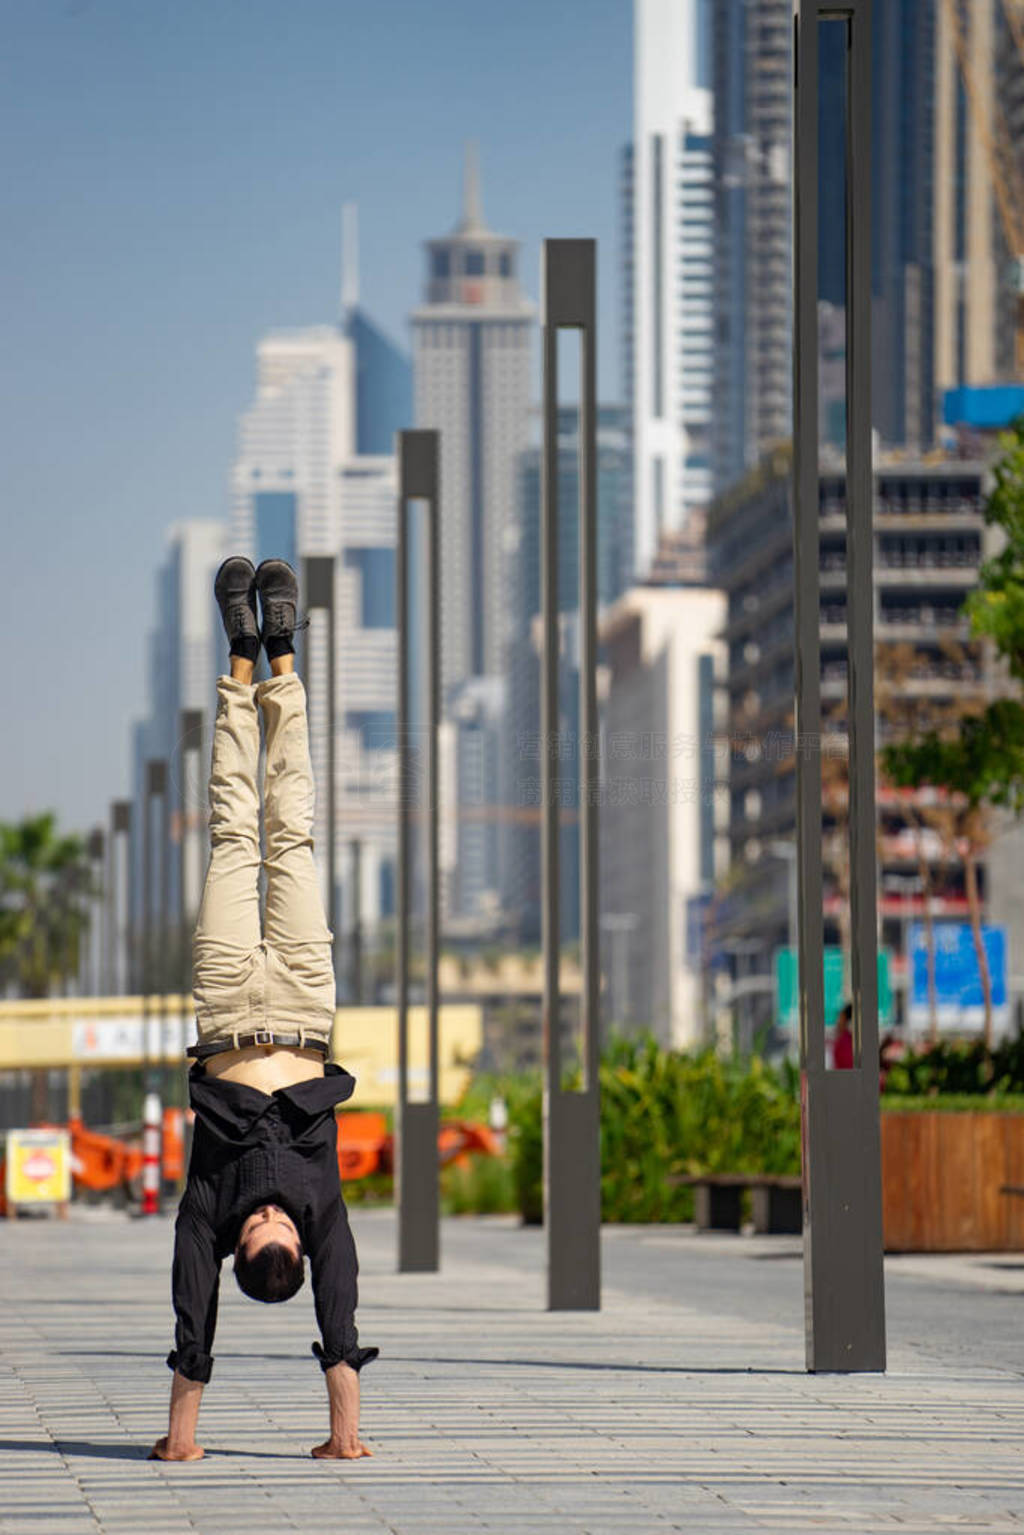 Acrobat keep balance one the hands with blurred Dubai cityscape.